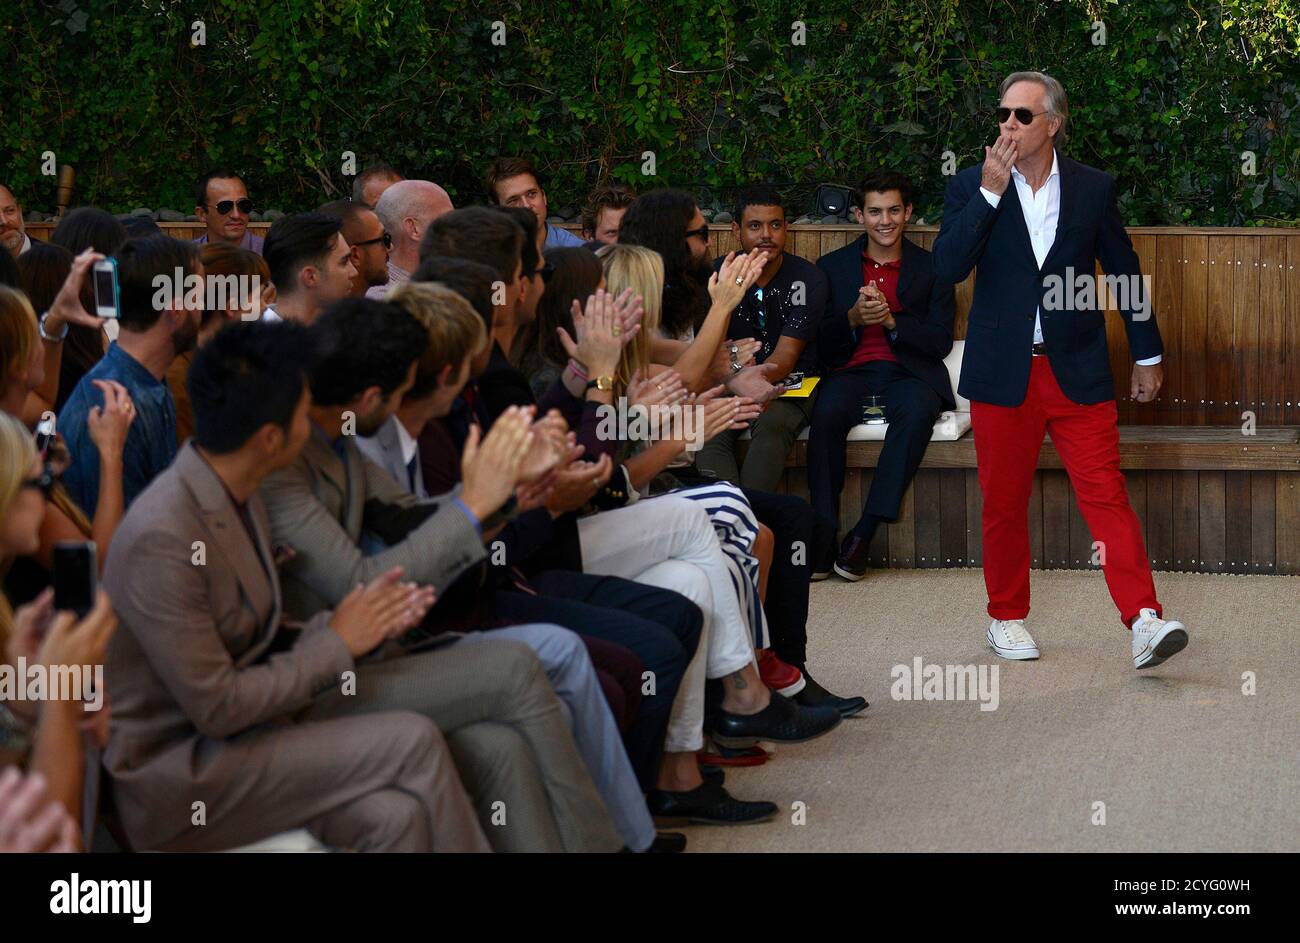 Fashion designer Tommy Hilfiger blows a kiss to the audience at the end of  the showing of his Spring/Summer 2013 collection during New York Fashion  Week September 7, 2012. REUTERS/Keith Bedford (UNITED